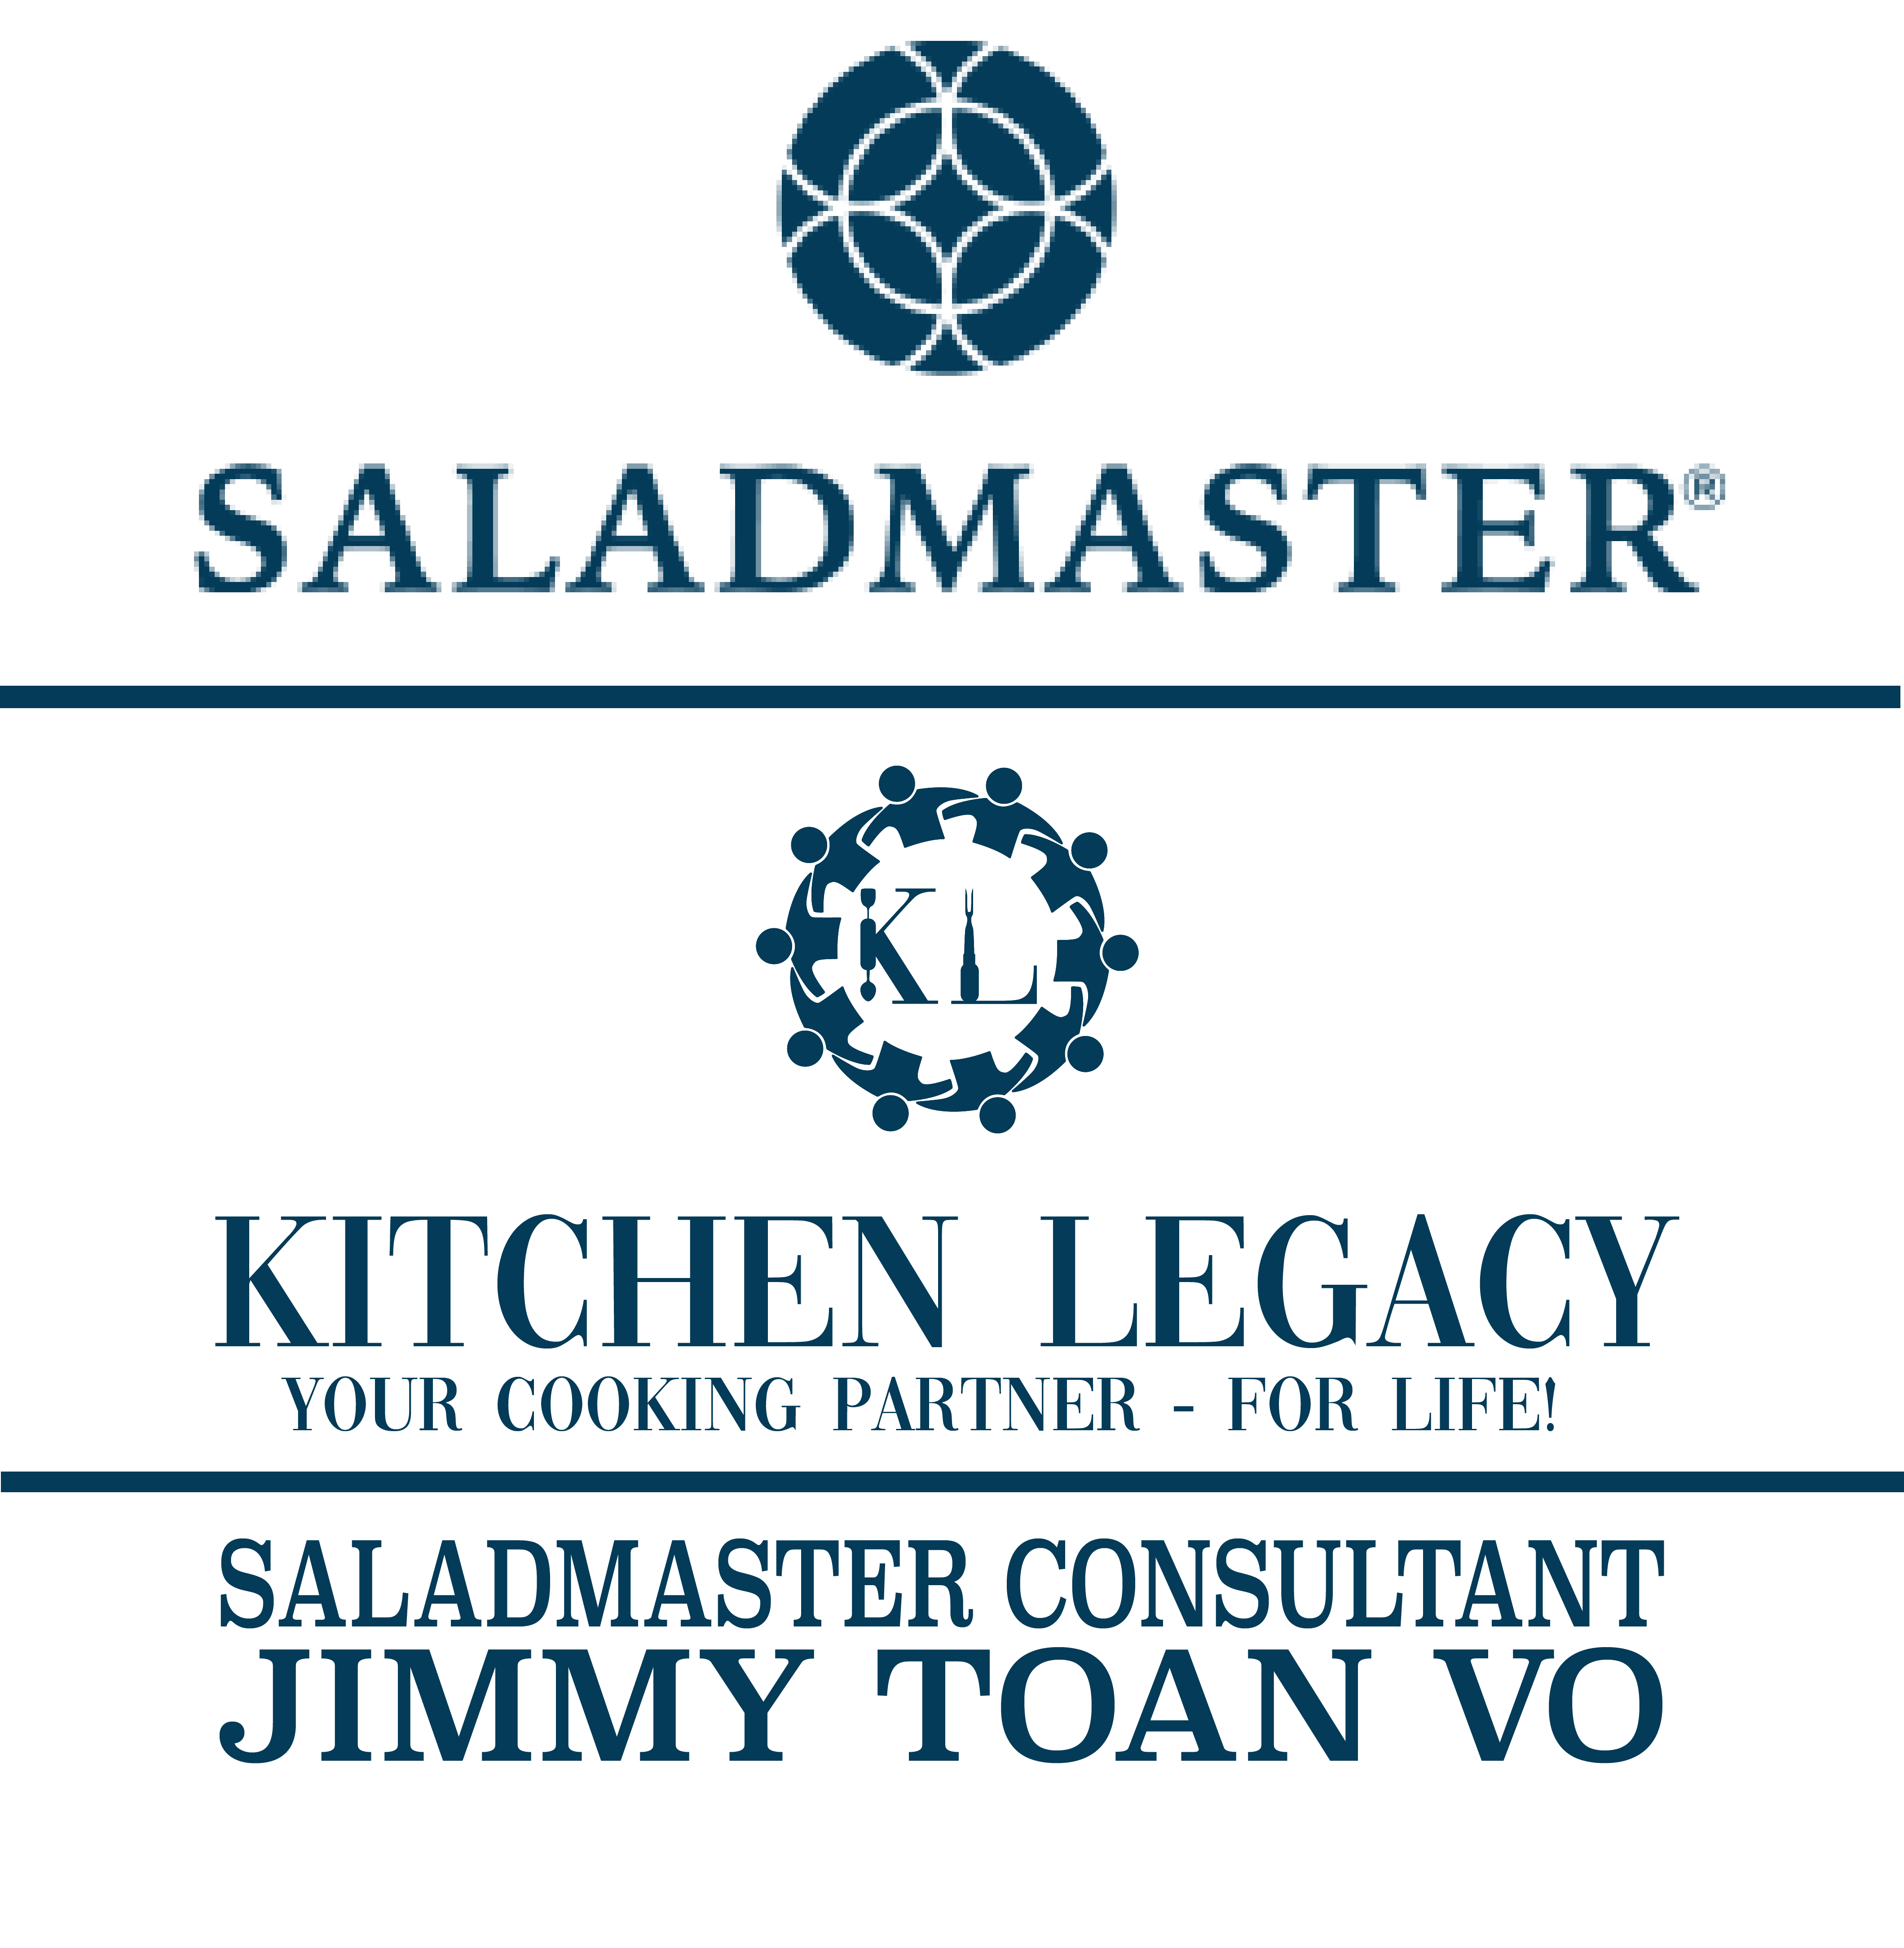 Saladmaster - Welcome to the Saladmaster Family! We love being